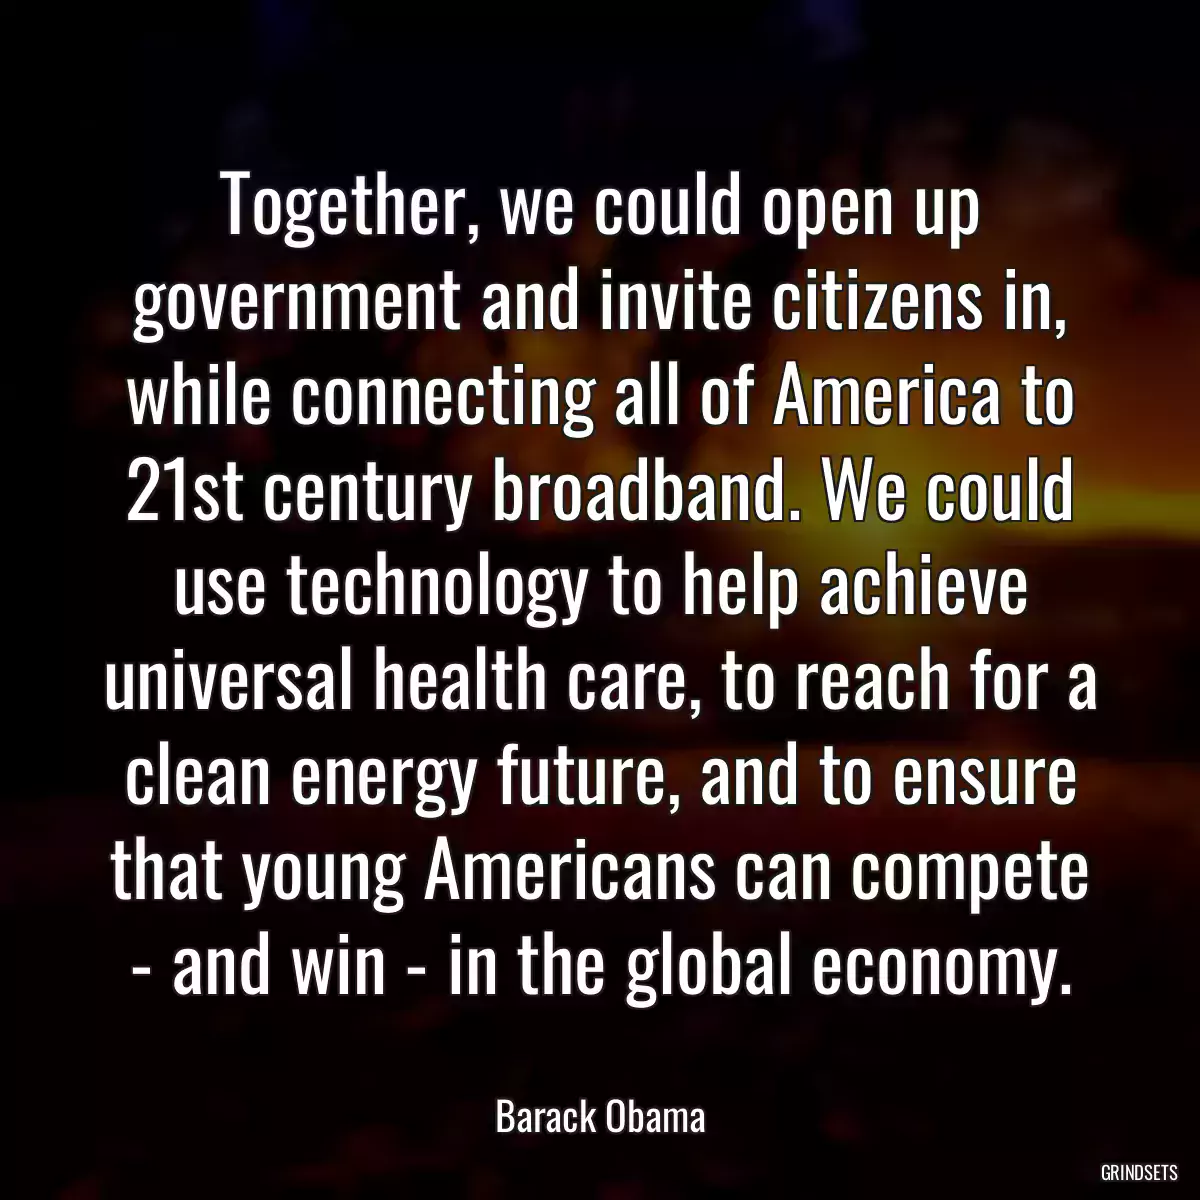 Together, we could open up government and invite citizens in, while connecting all of America to 21st century broadband. We could use technology to help achieve universal health care, to reach for a clean energy future, and to ensure that young Americans can compete - and win - in the global economy.